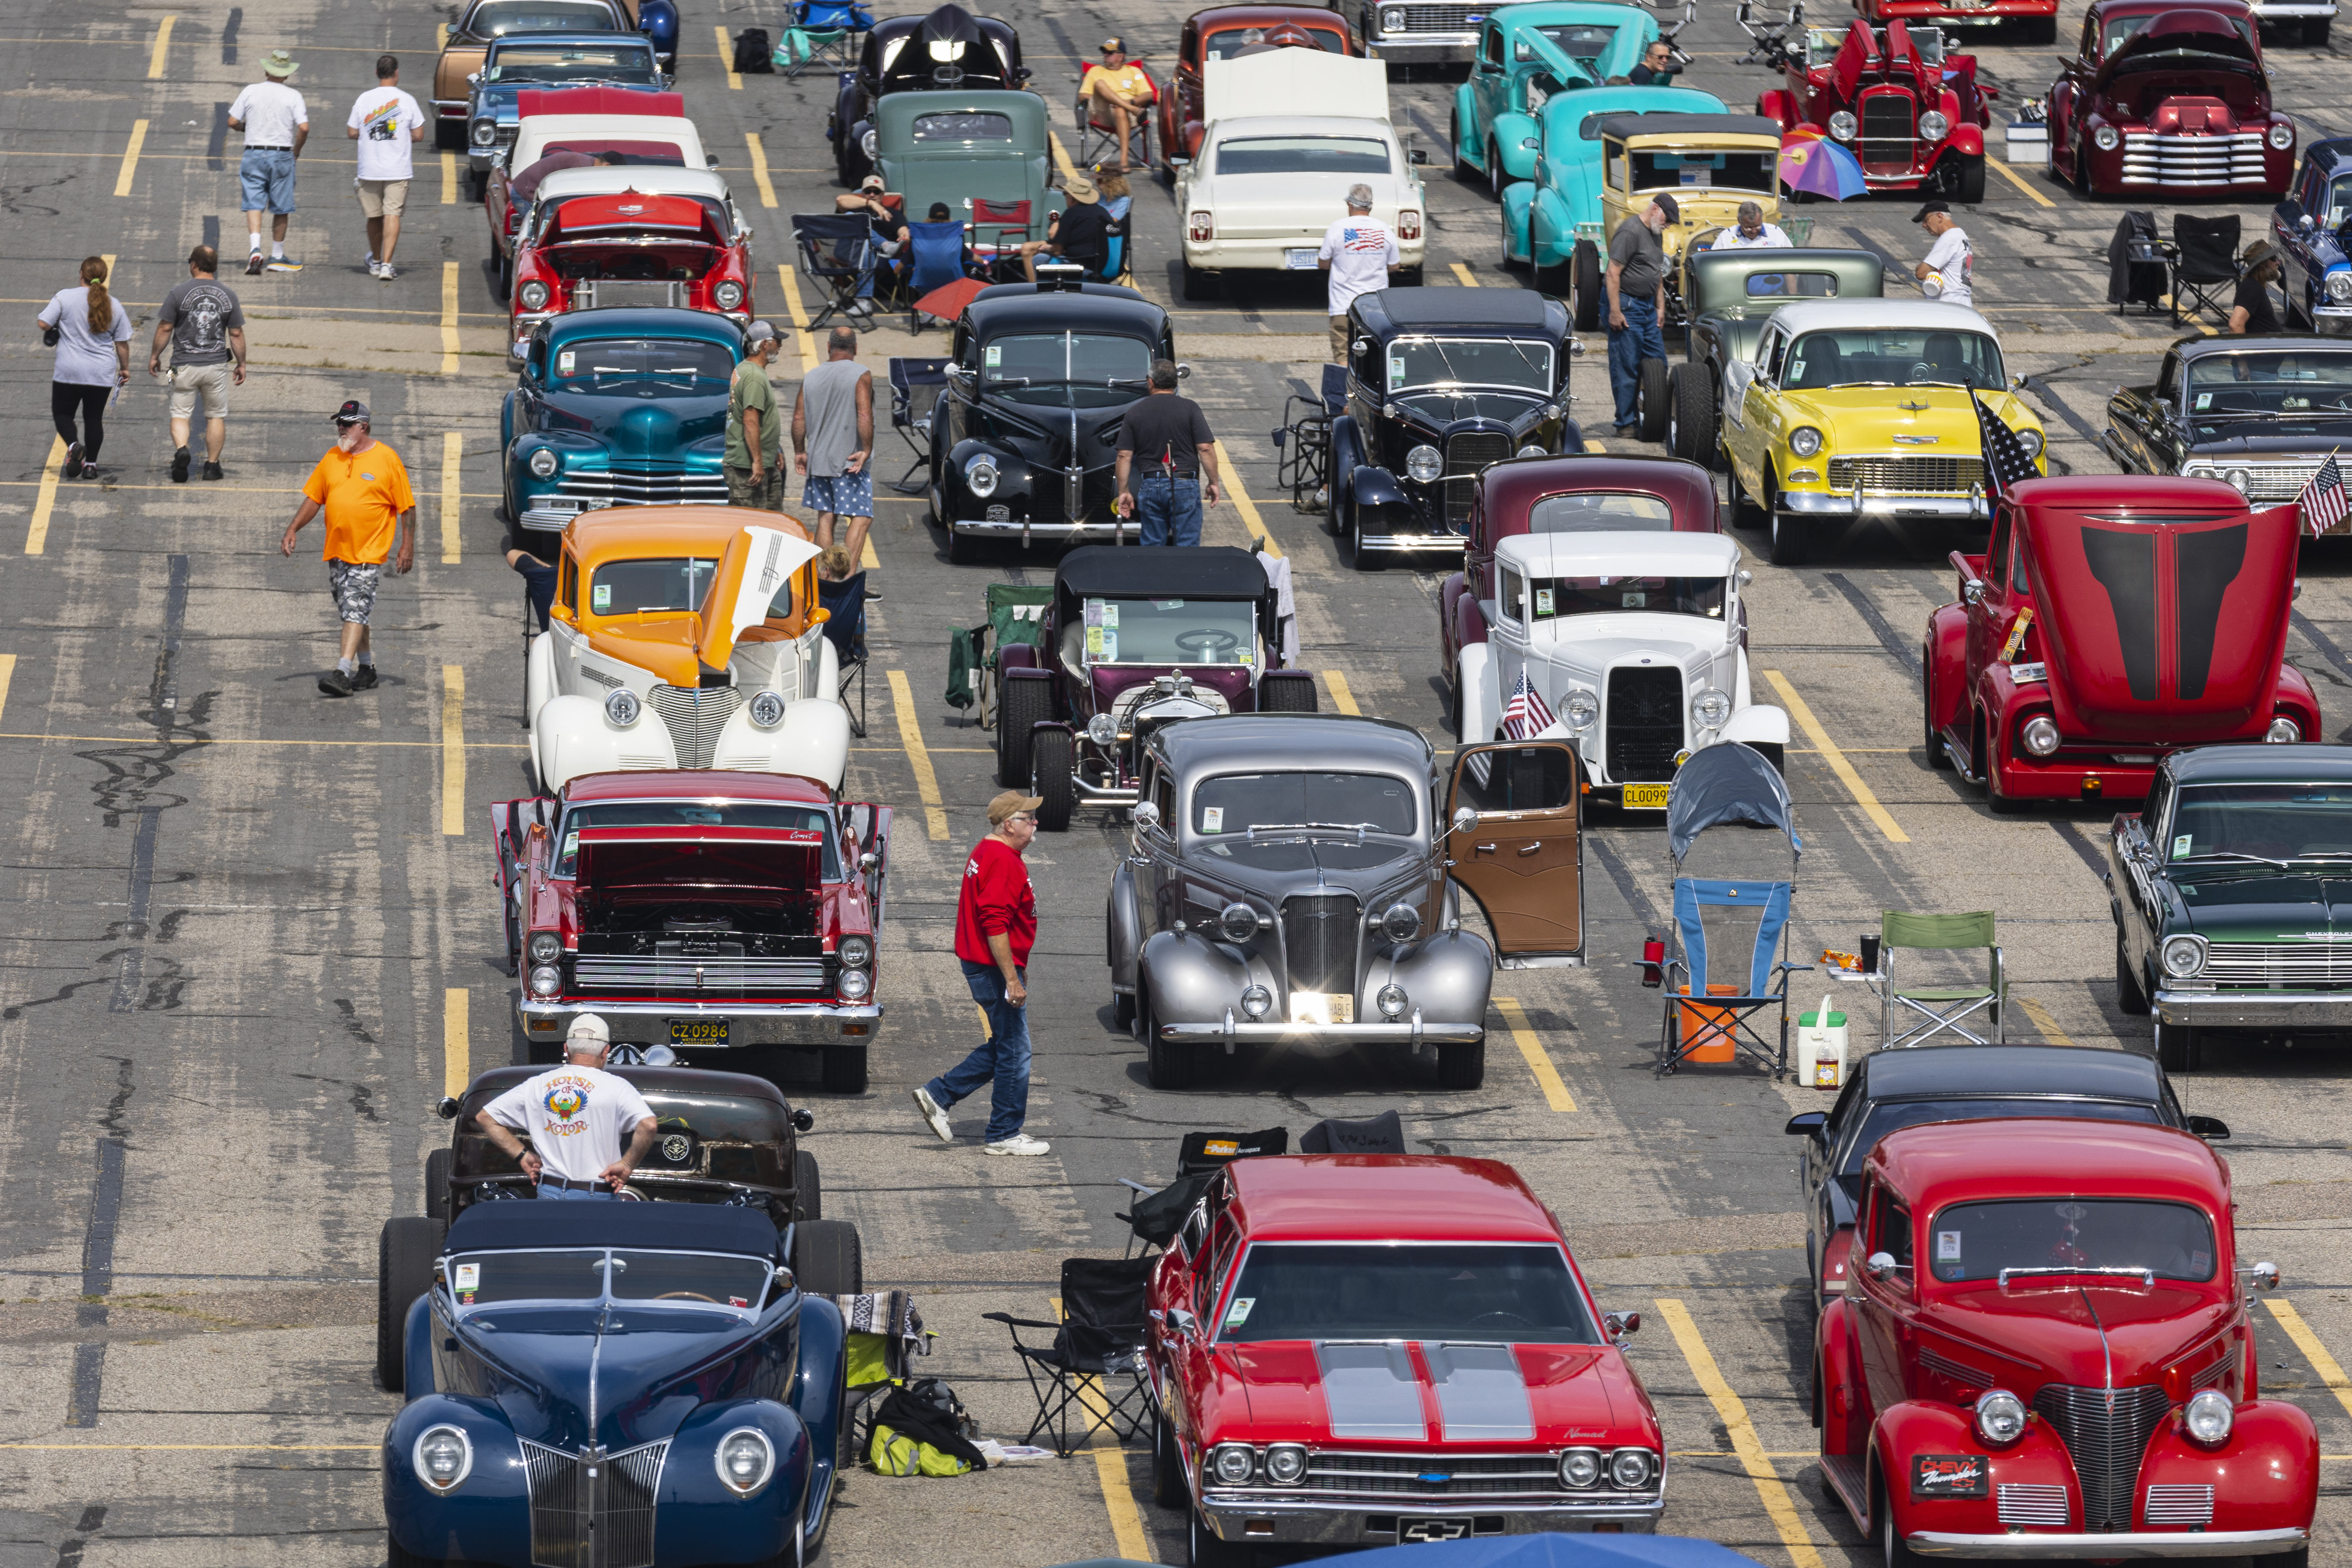 42nd Annual Street Rod Nationals North